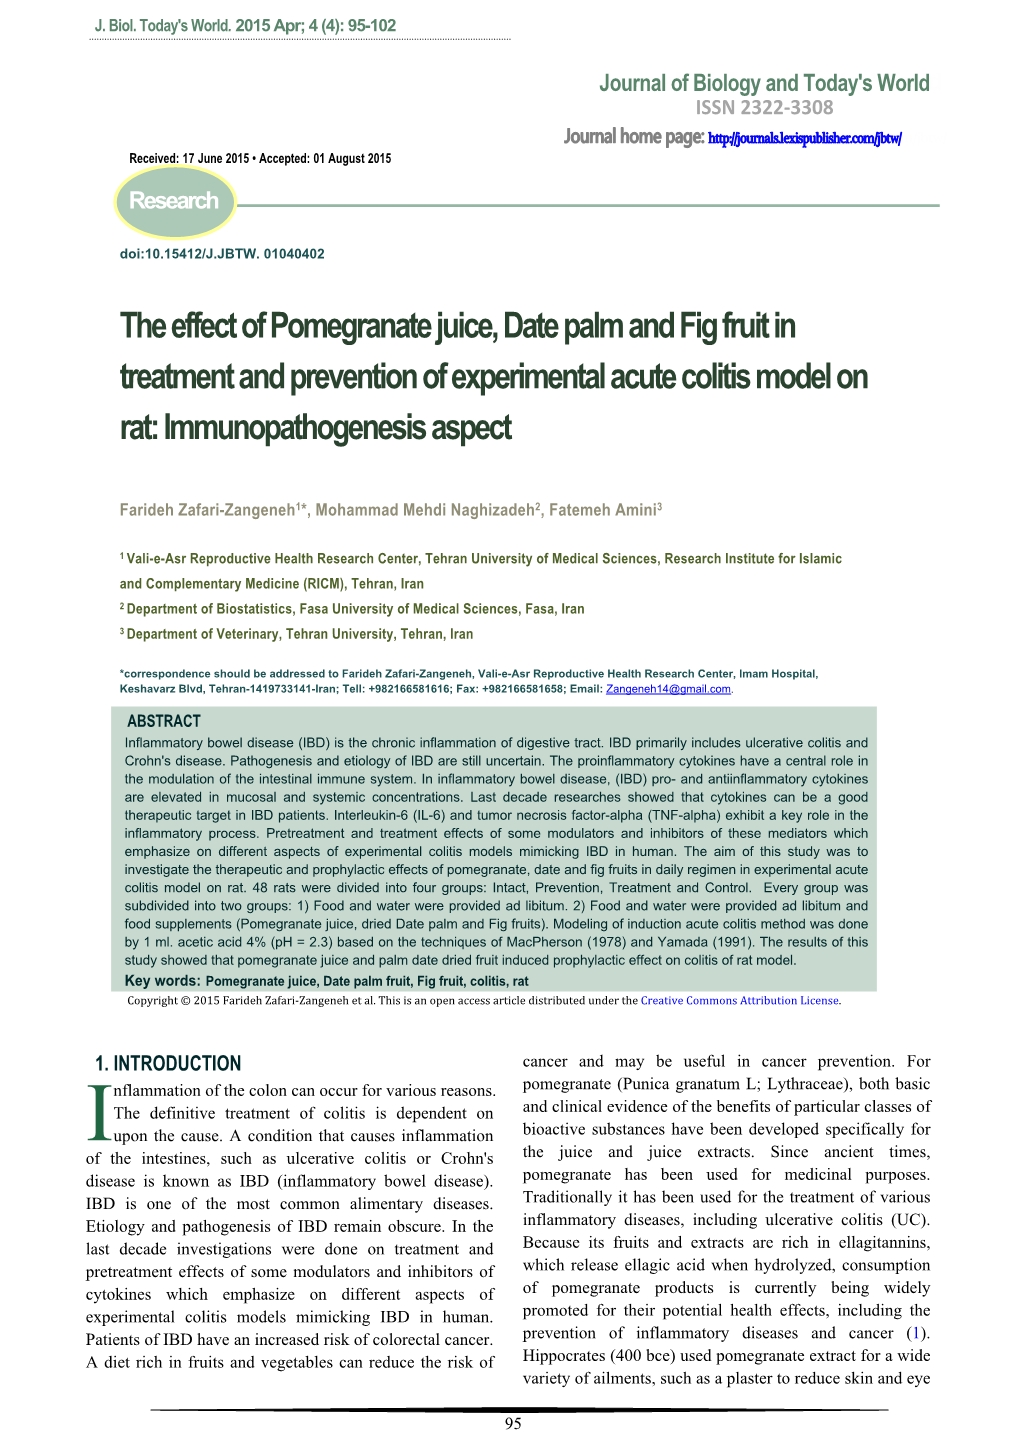 The Effect of Pomegranate Juice, Date Palm and Fig Fruit in Treatment and Prevention of Experimental Acute Colitis Model on Rat: Immunopathogenesis Aspect